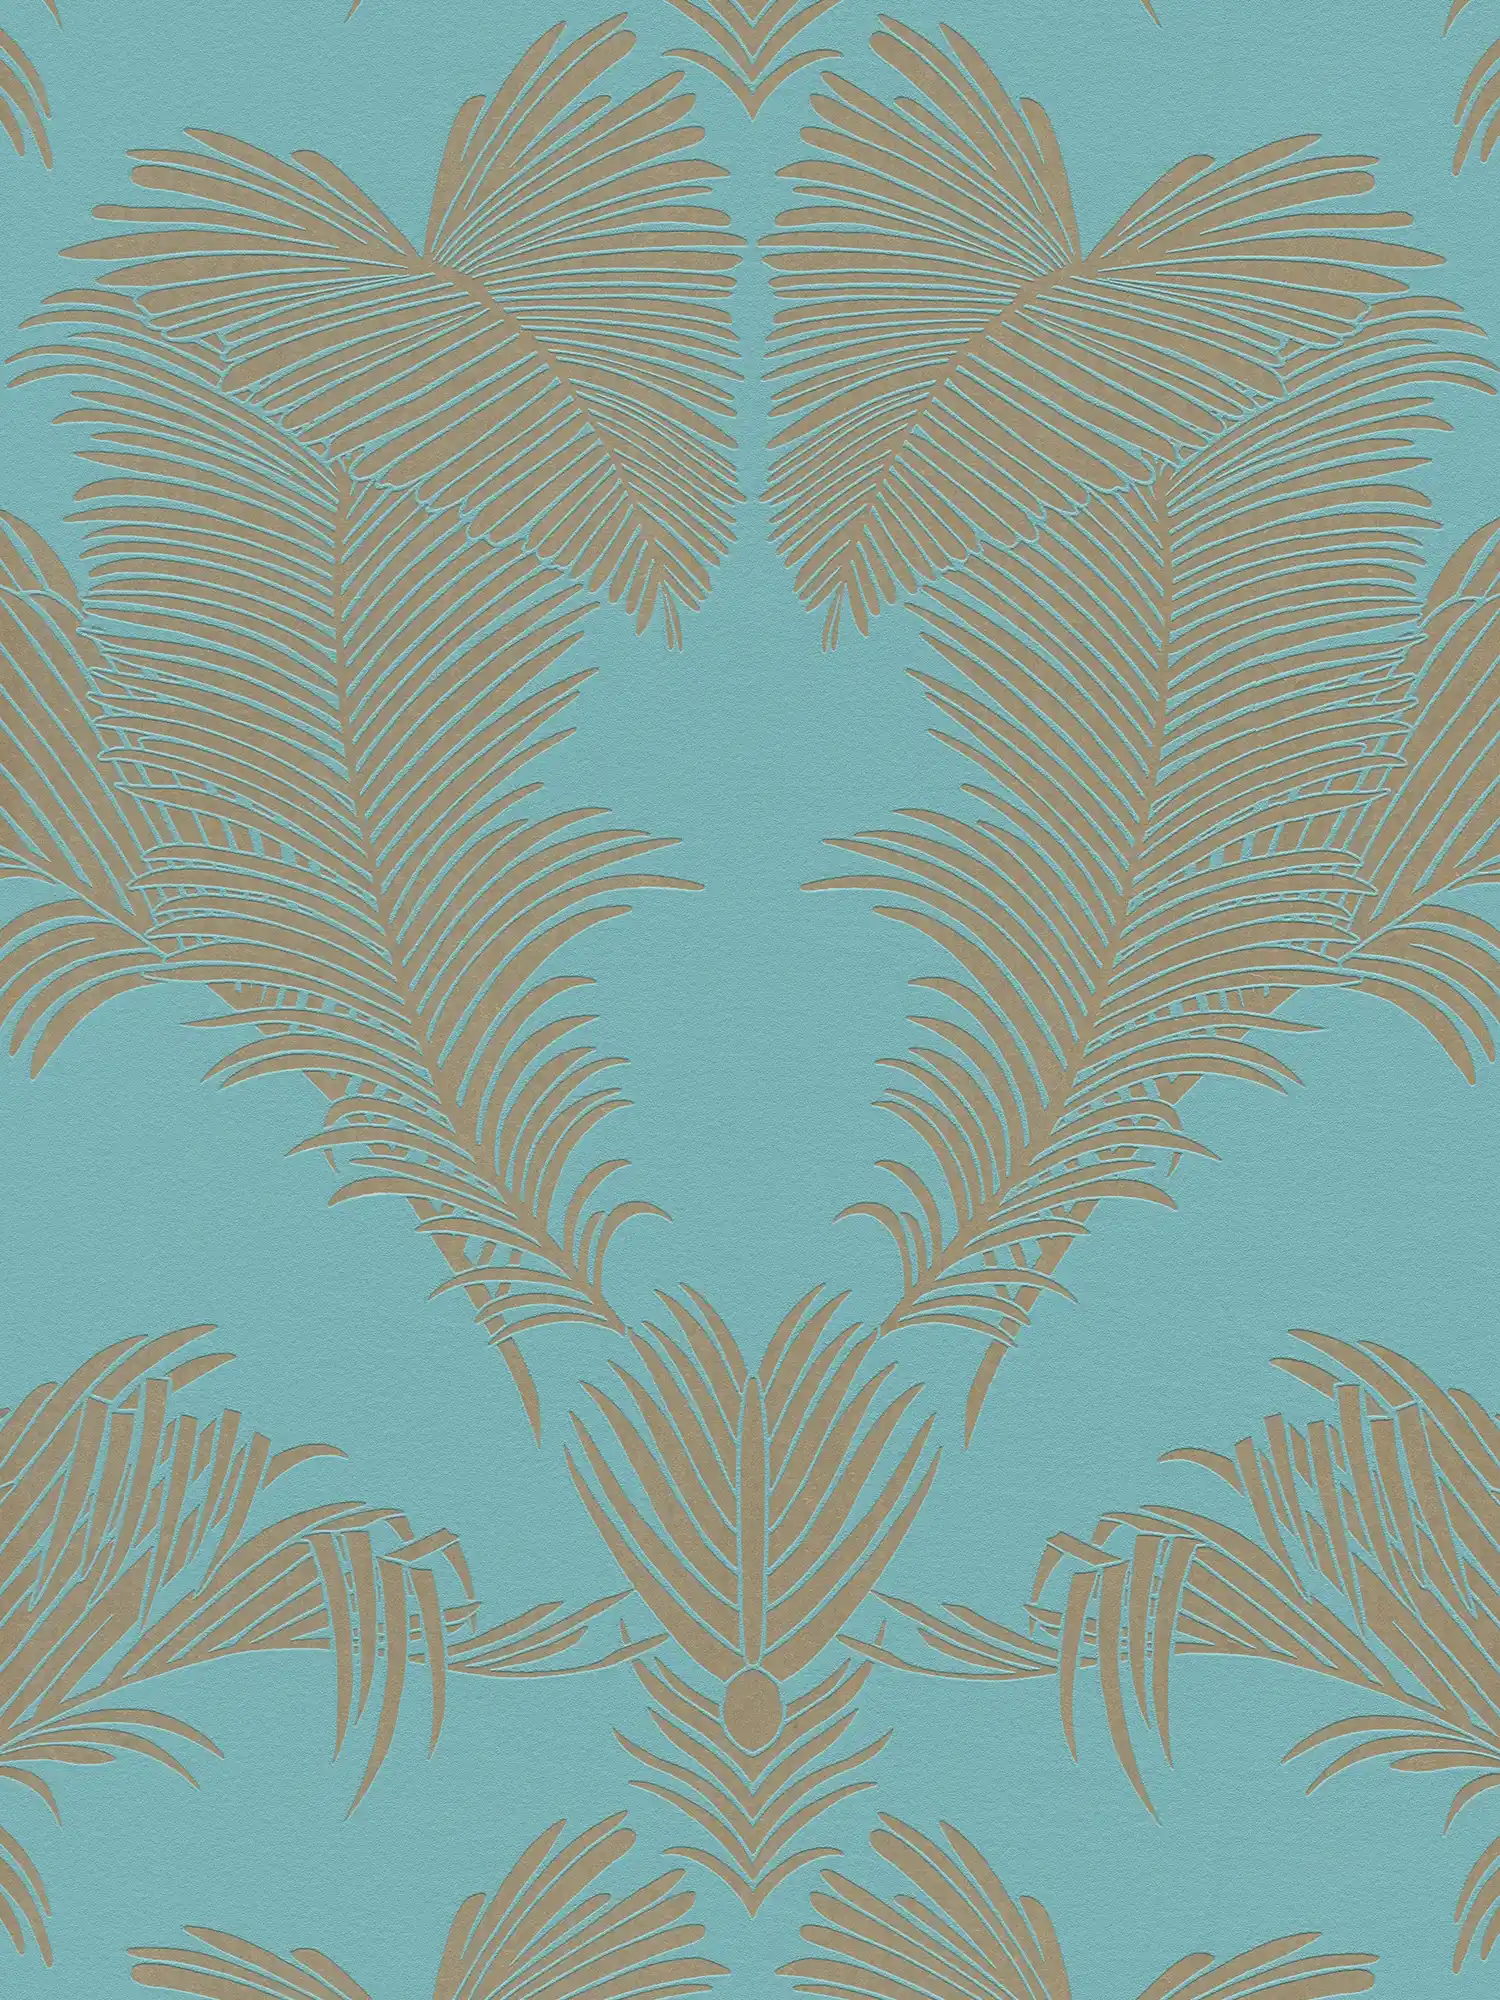 Turquoise non-woven wallpaper with leaf motif in metallic gold
